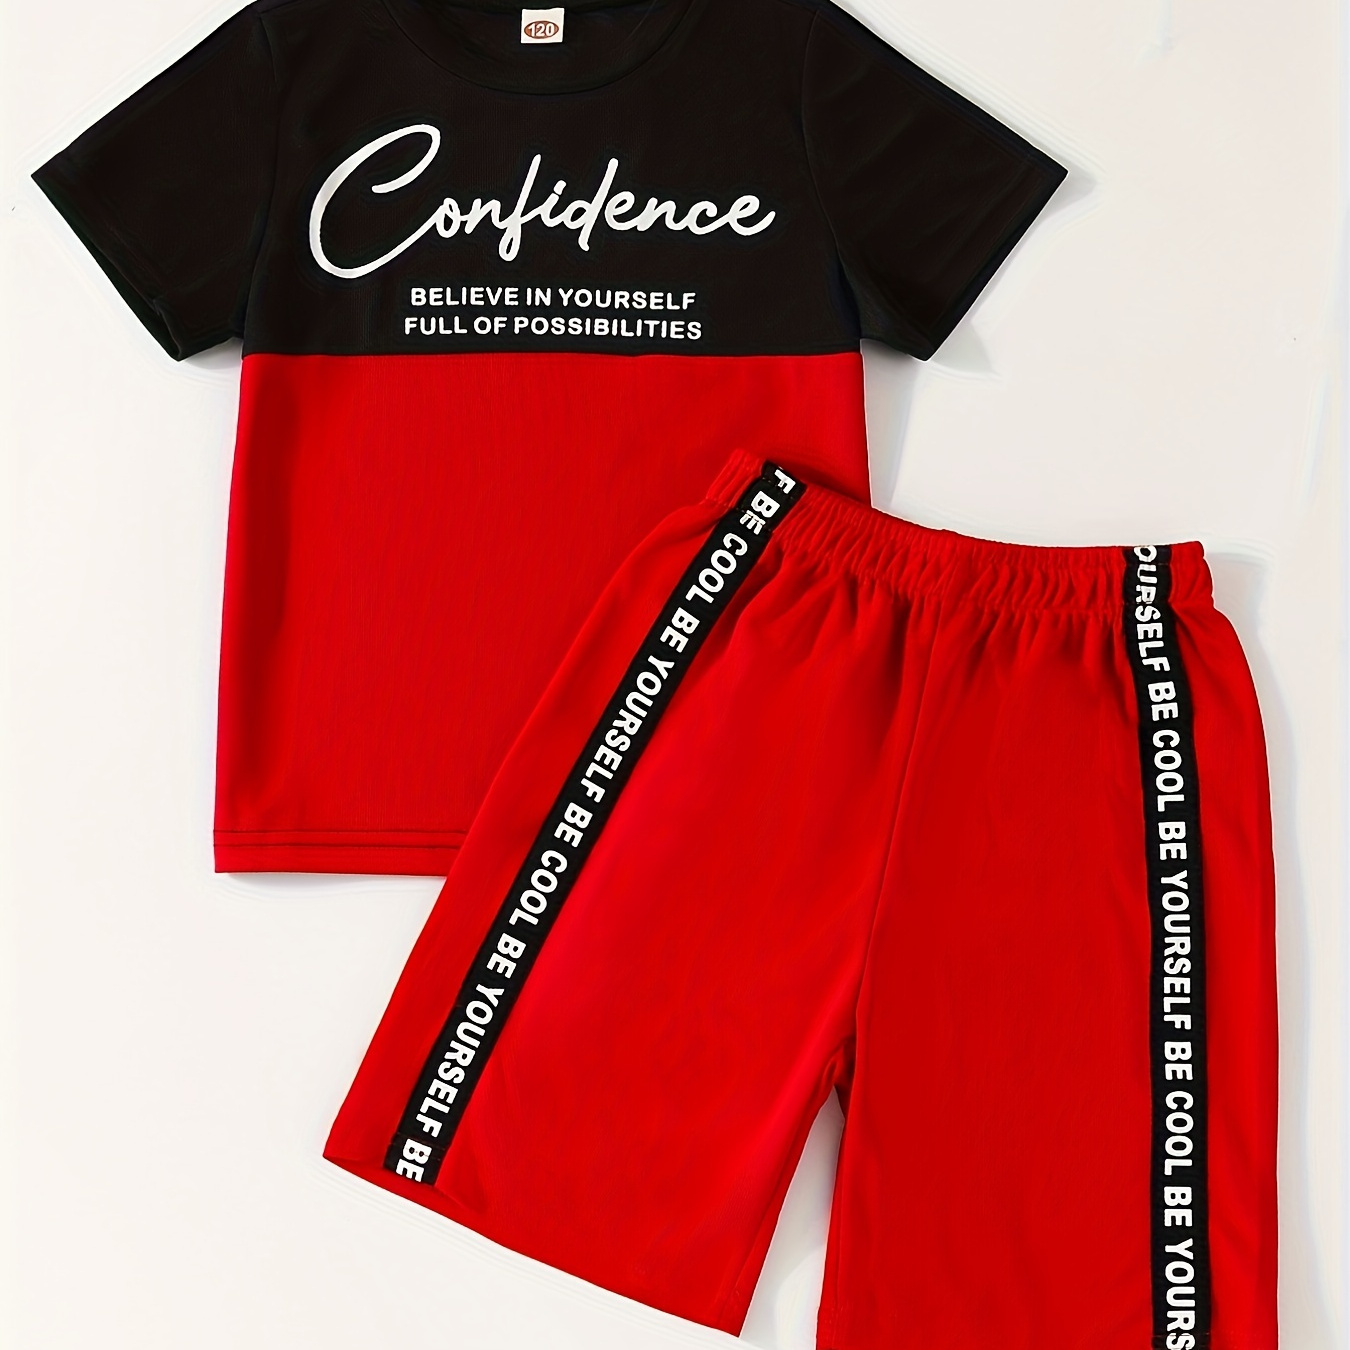 

2pcs Boy's Color Clash Short-sleeve Outfit, "confidence" Print T-shirt & Shorts Set, Kid's Clothes For Summer, As Gift